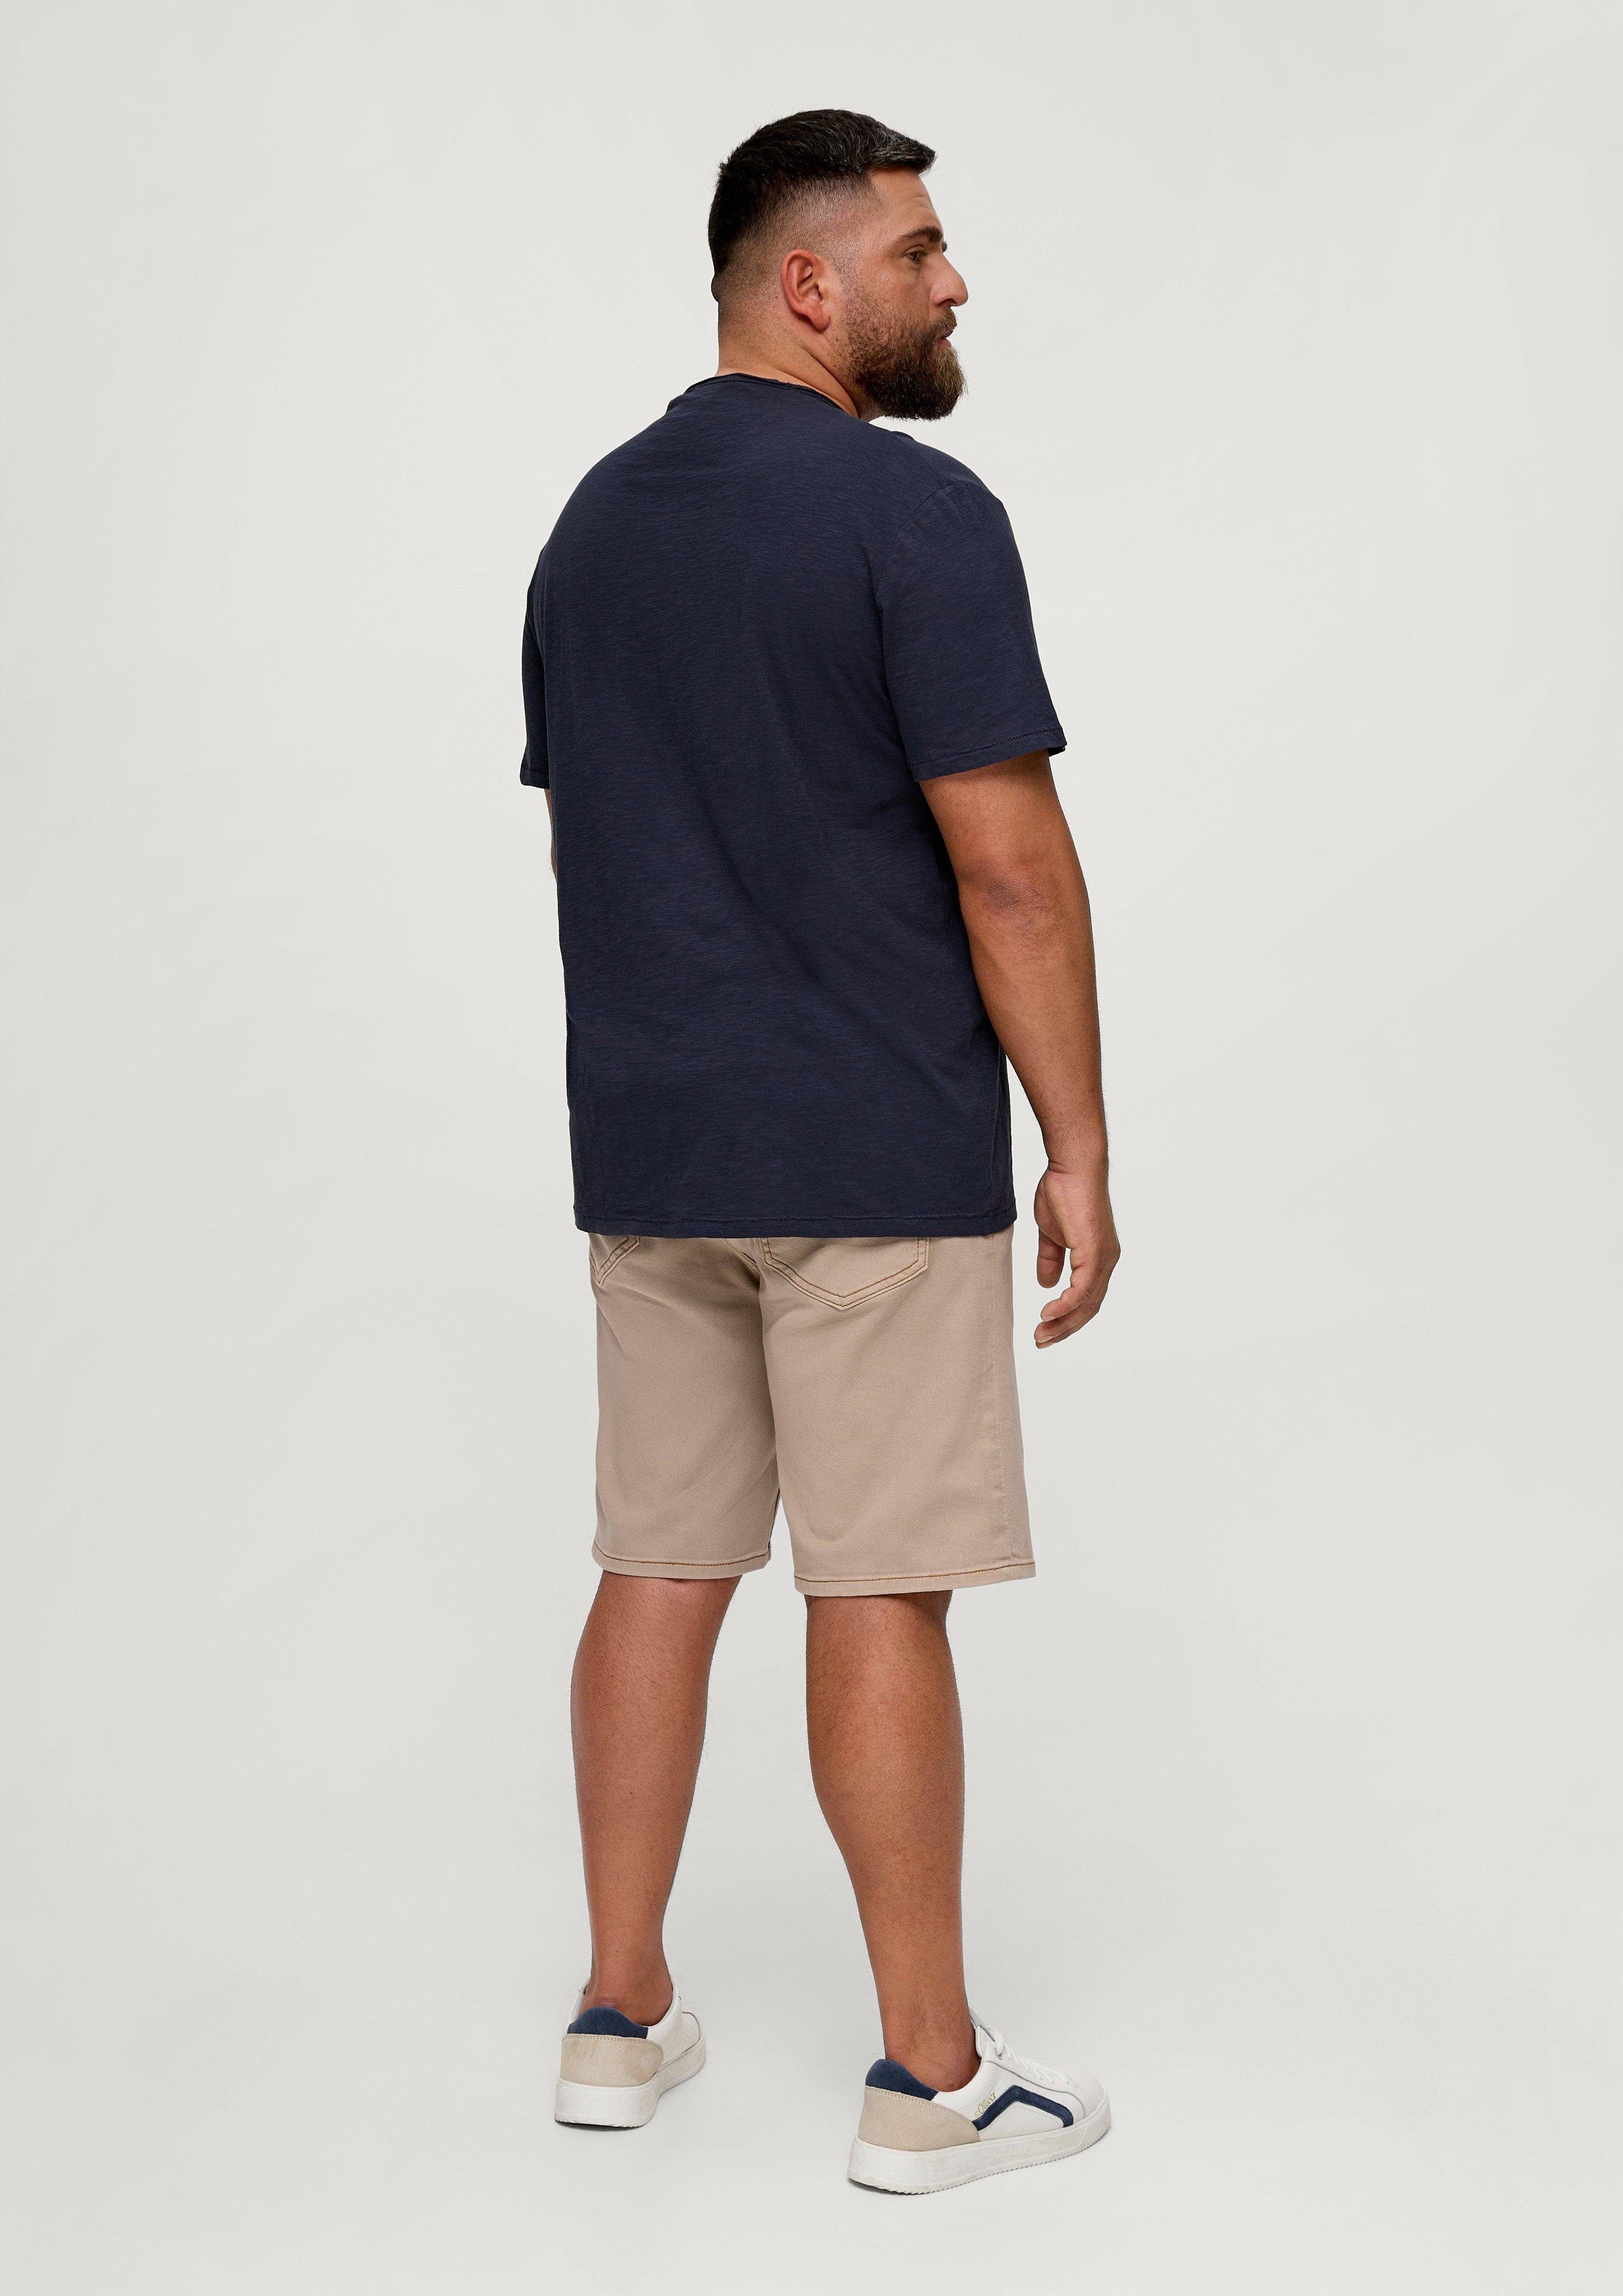 Leg s.Oliver Jeans-Bermuda Mid Label-Patch Relaxed sandstein / Jeansshorts Rise Straight / / Casby Fit